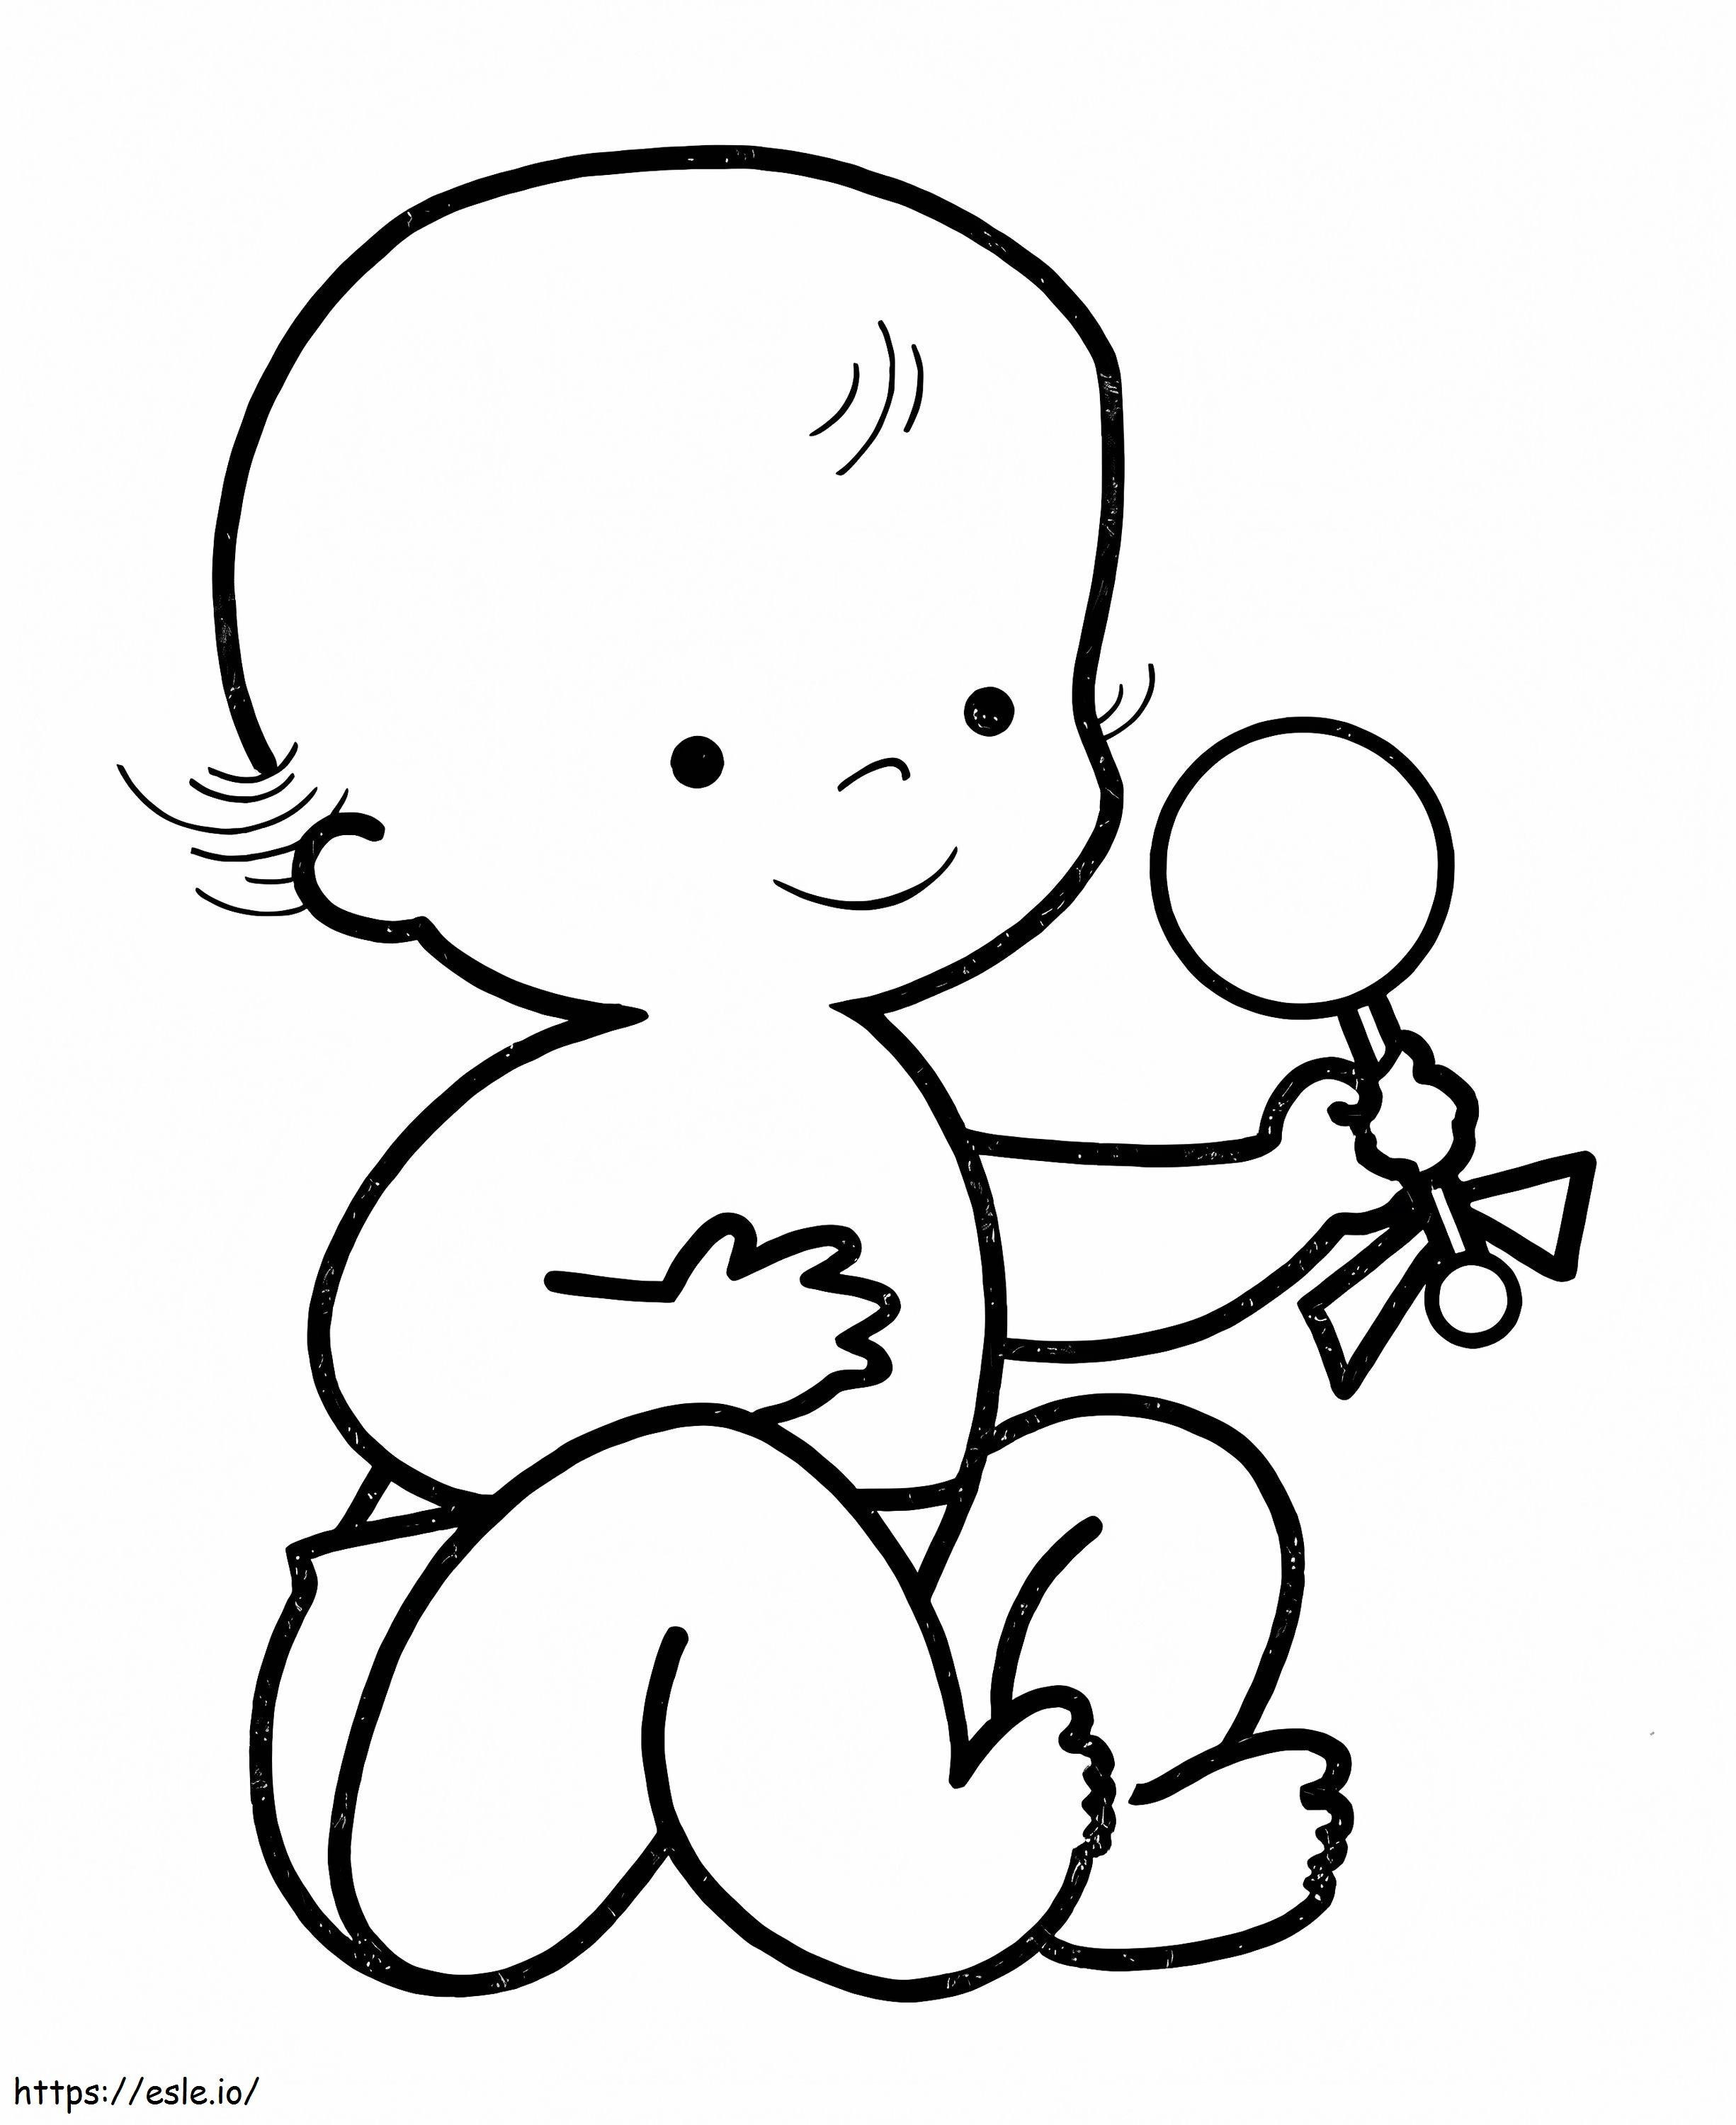 Baby Holding Candy coloring page